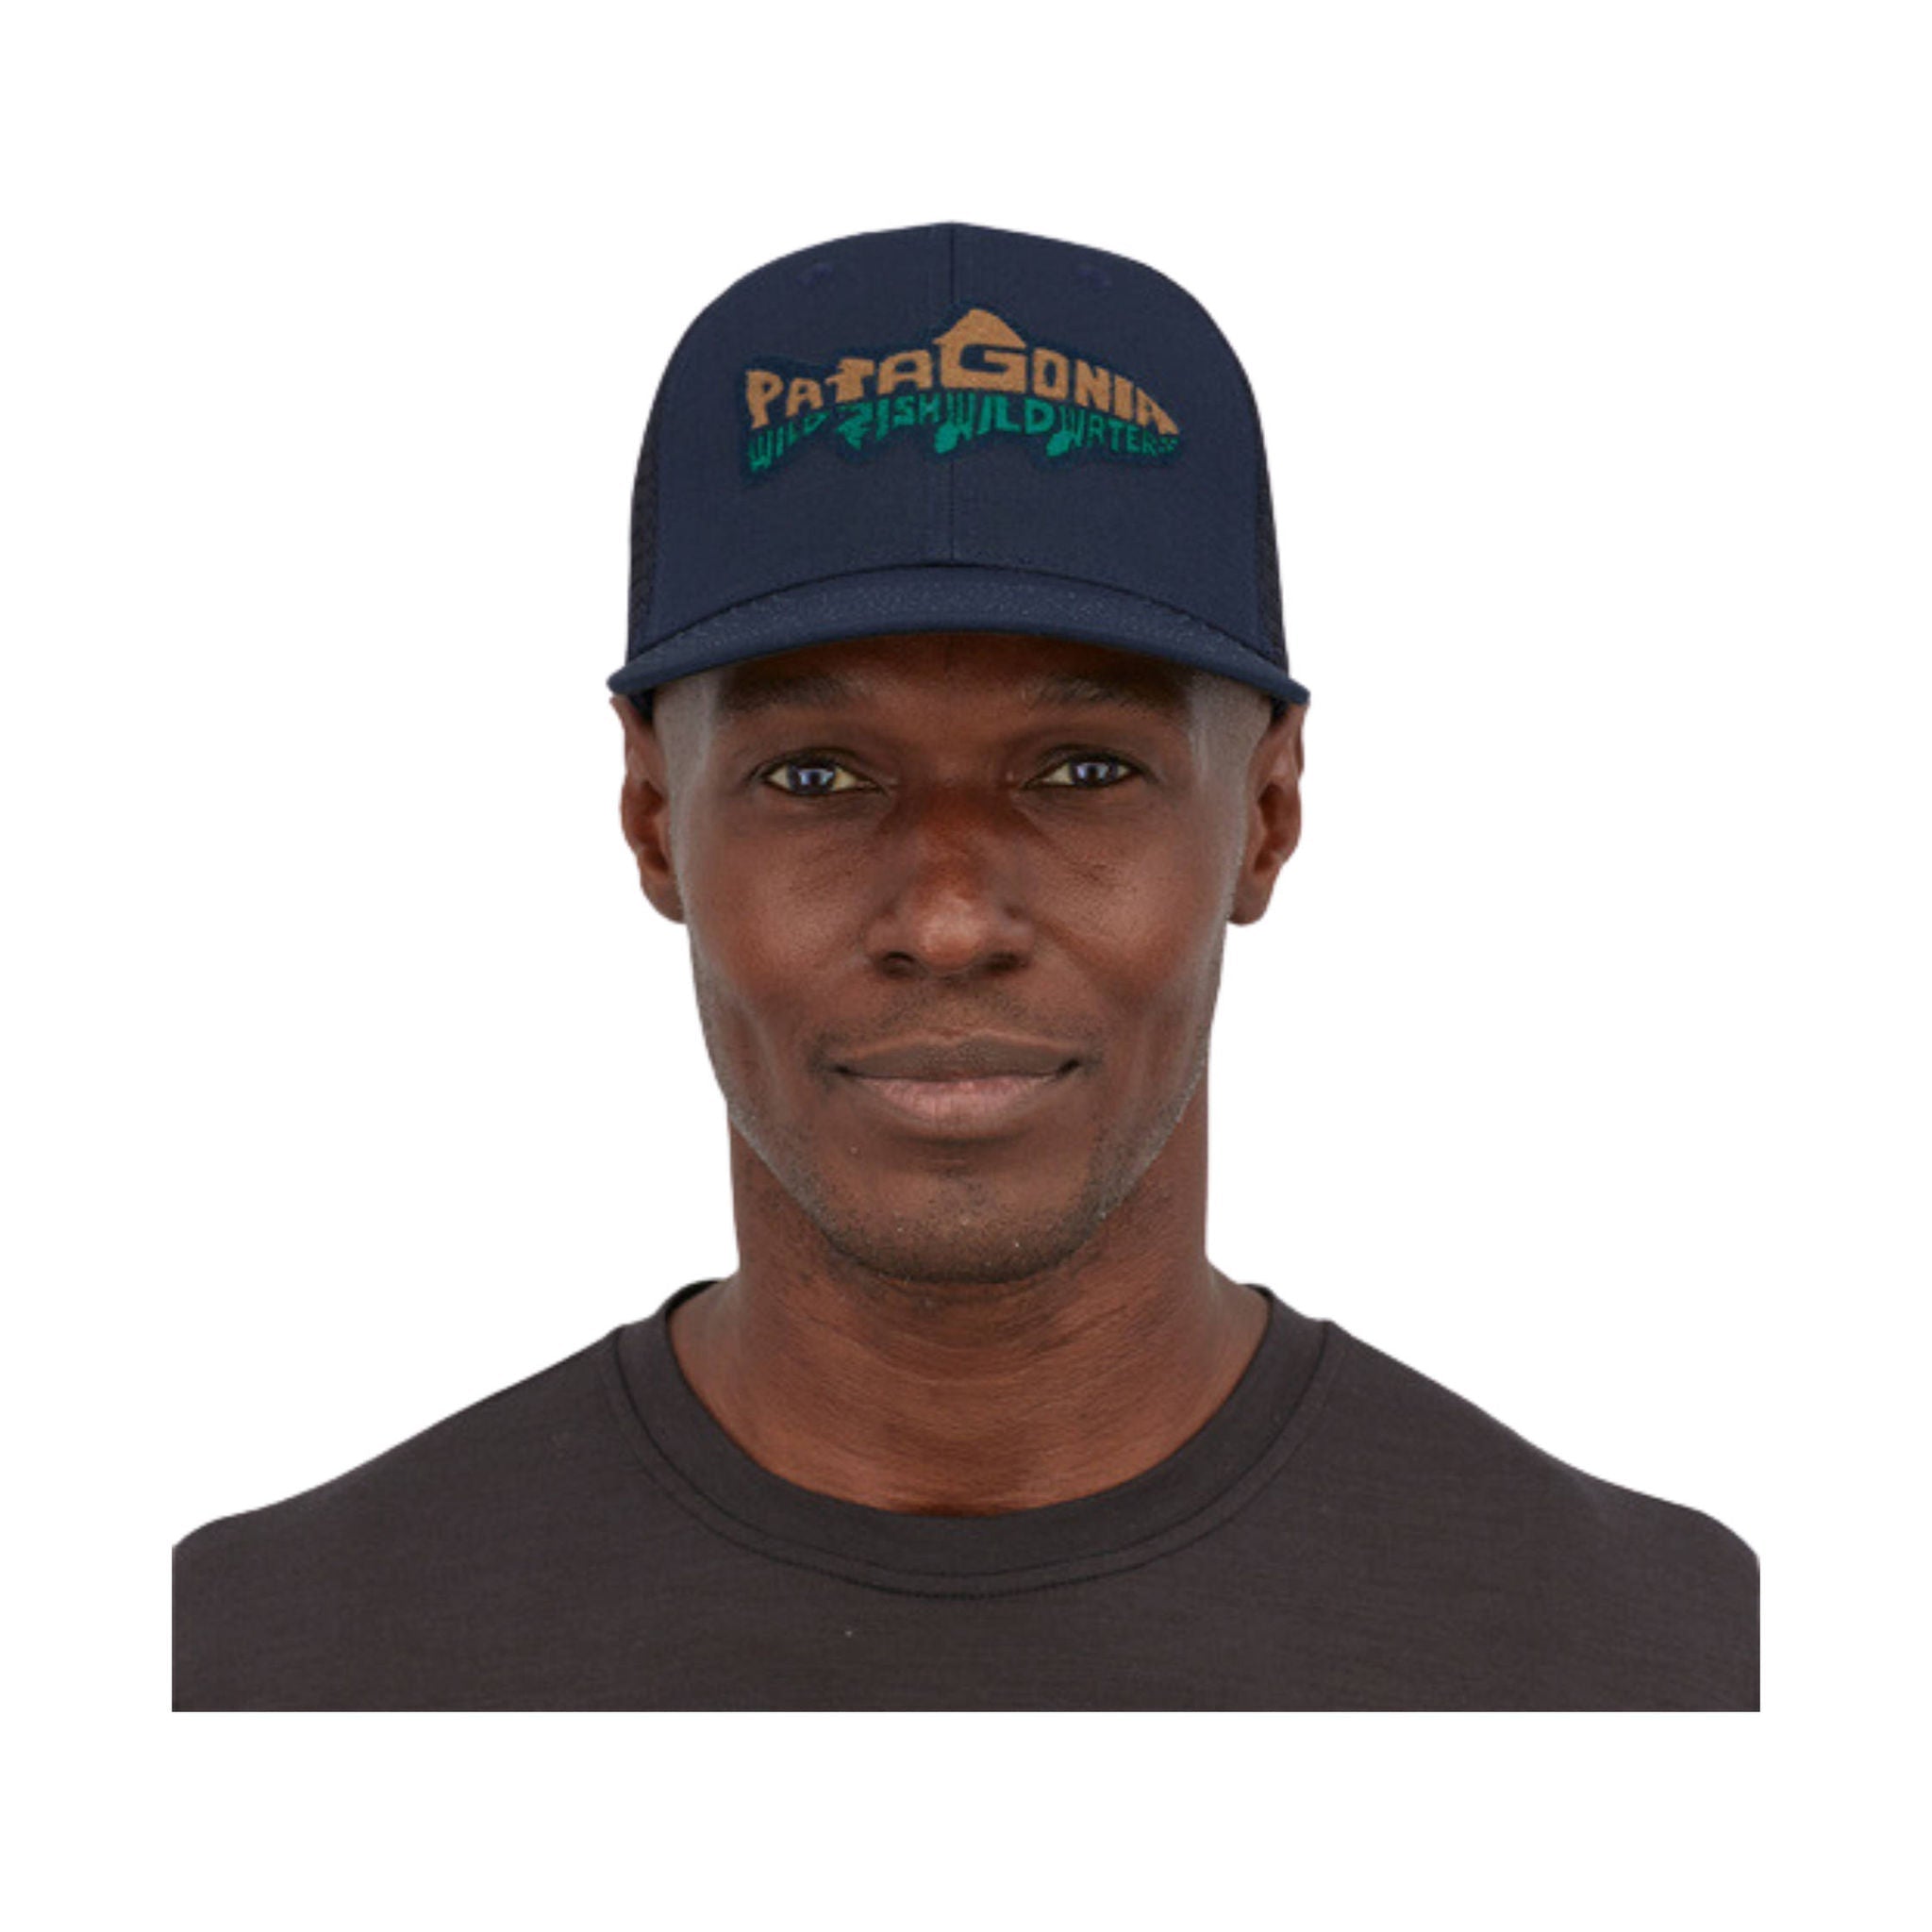 Patagonia Men's Take a Stand Trucker Hat - New Navy With Wild Waterlin –  Lenny's Shoe & Apparel